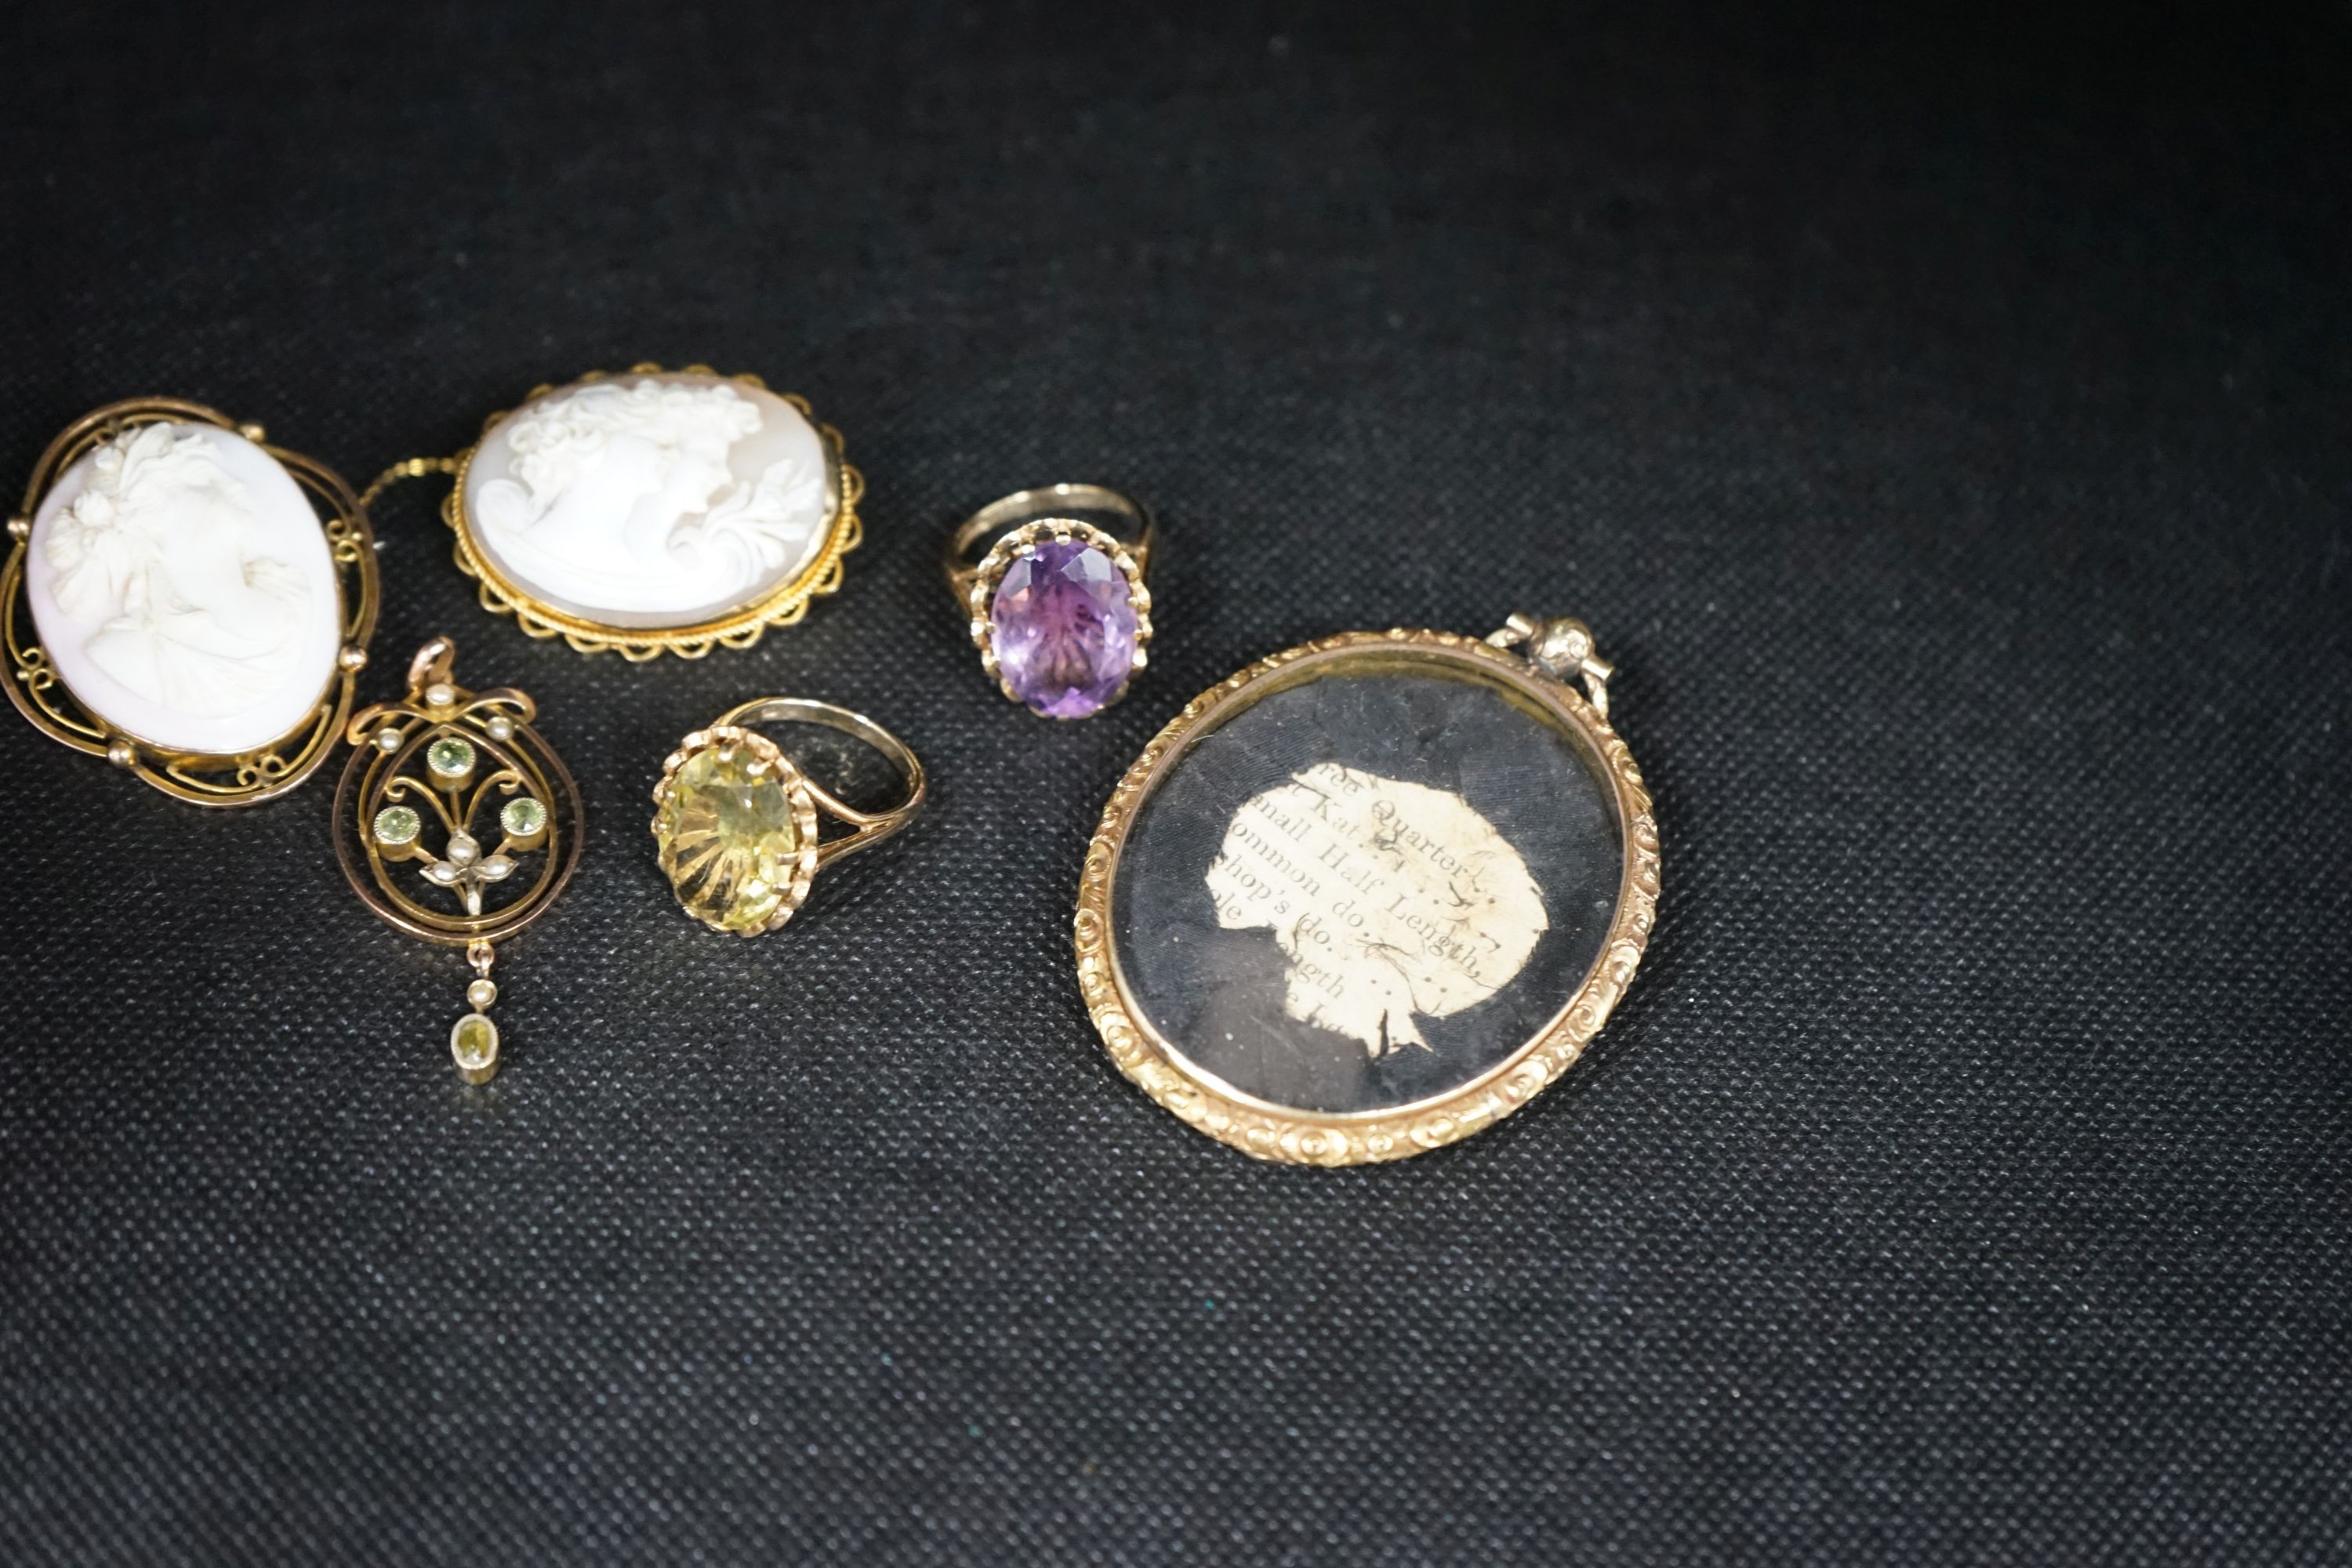 Two modern 9ct gold and gem set rings, a 9ct and gem set pendant, two 9ct mounted cameo shell brooches, gross weight 36.5 grams and a Victorian oval pendant frame, 55mm.